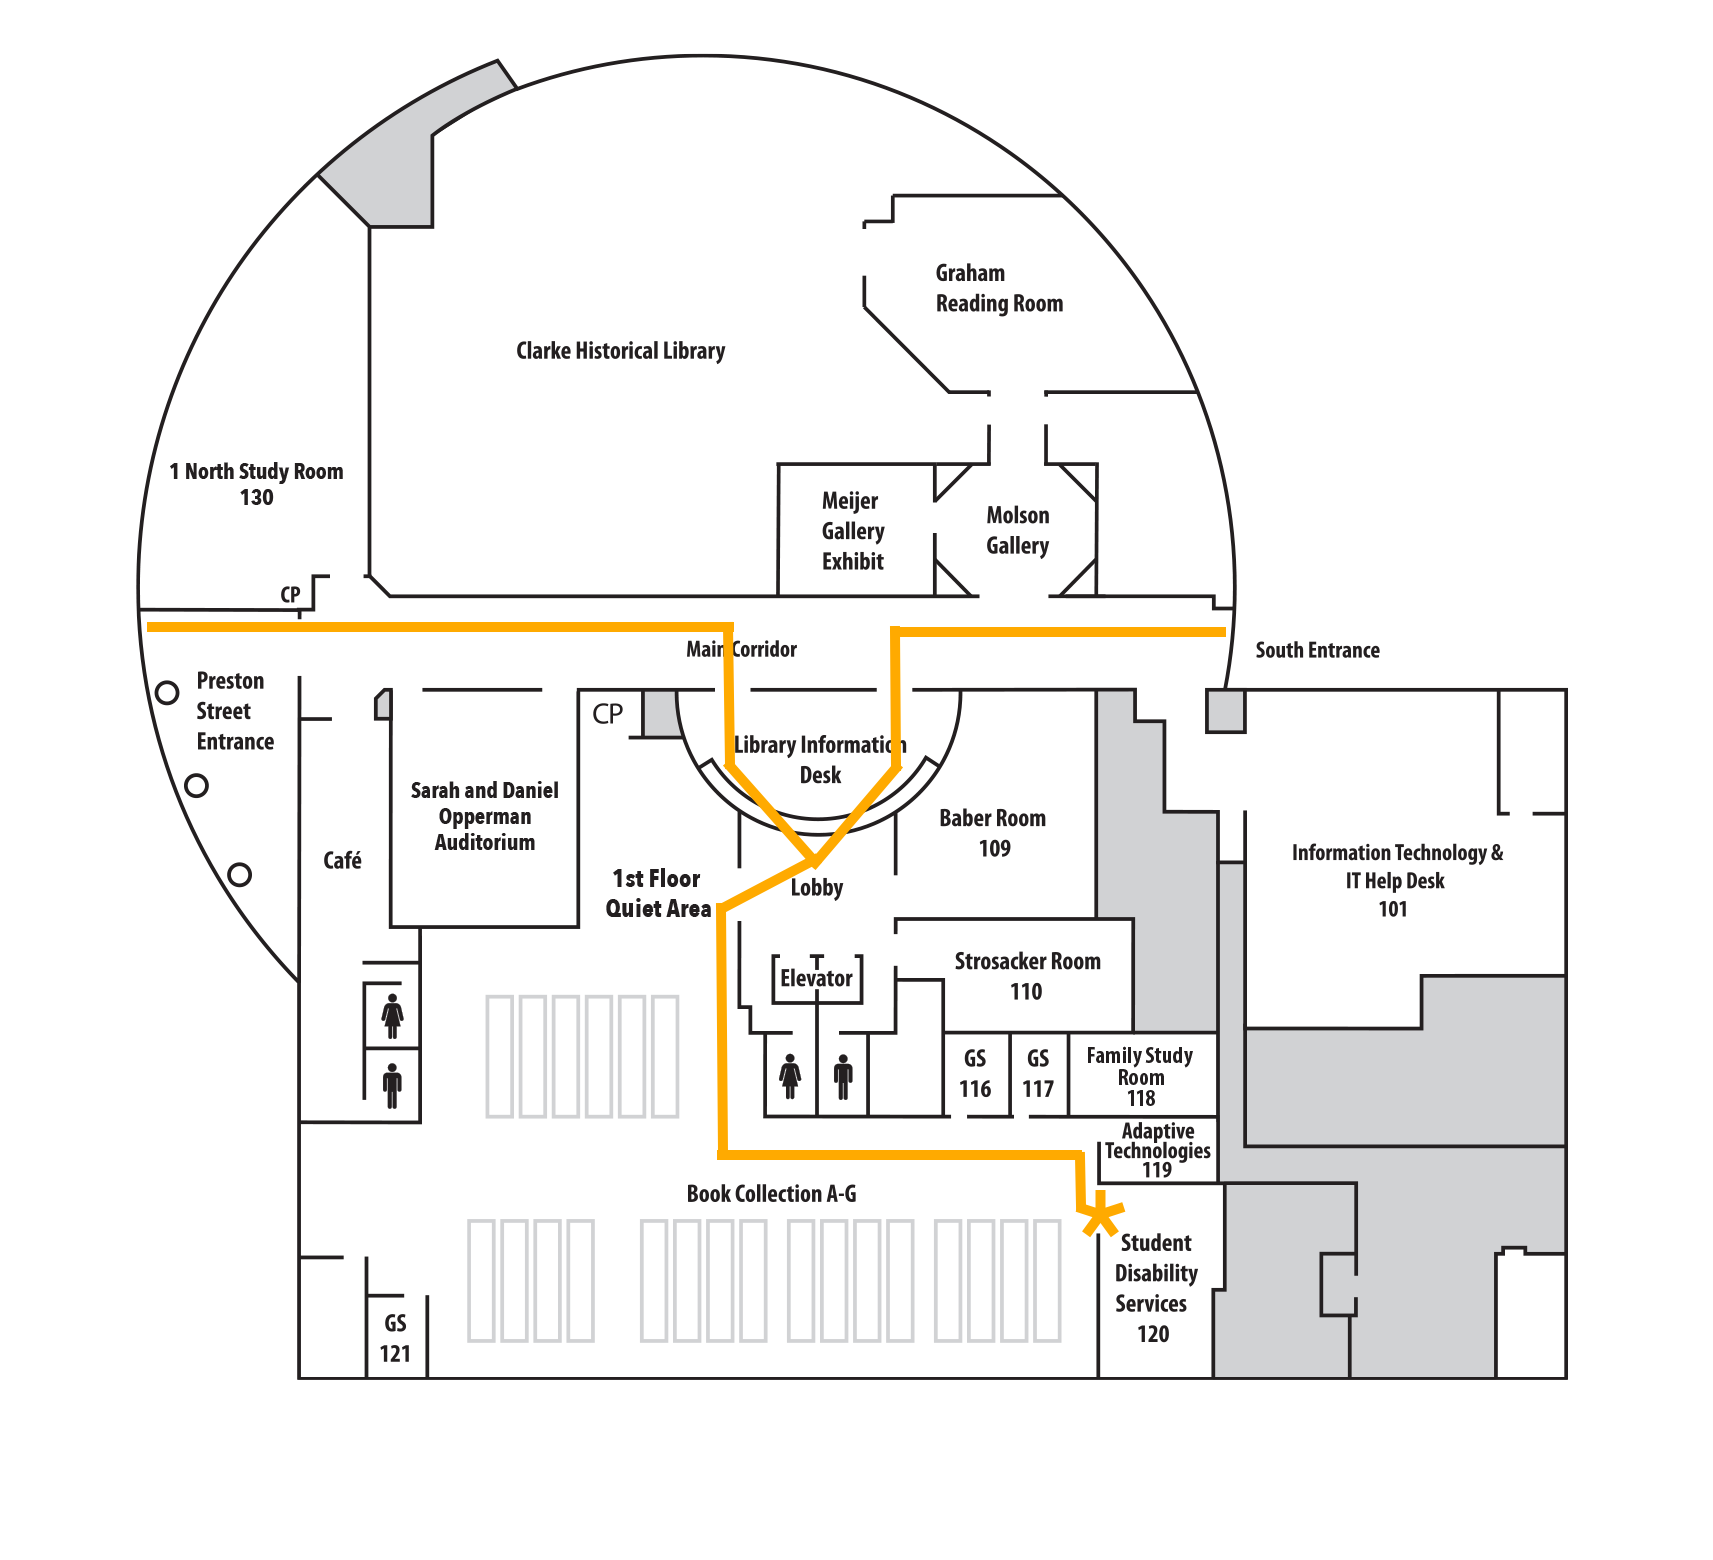 Our office is located in Park Library 120. Go through the sliding glass doors located to the right of the elevators in the first floor lobby, and then follow the hallway around to the left until you reach our office. You will need your ID to enter, or just knock on the door.